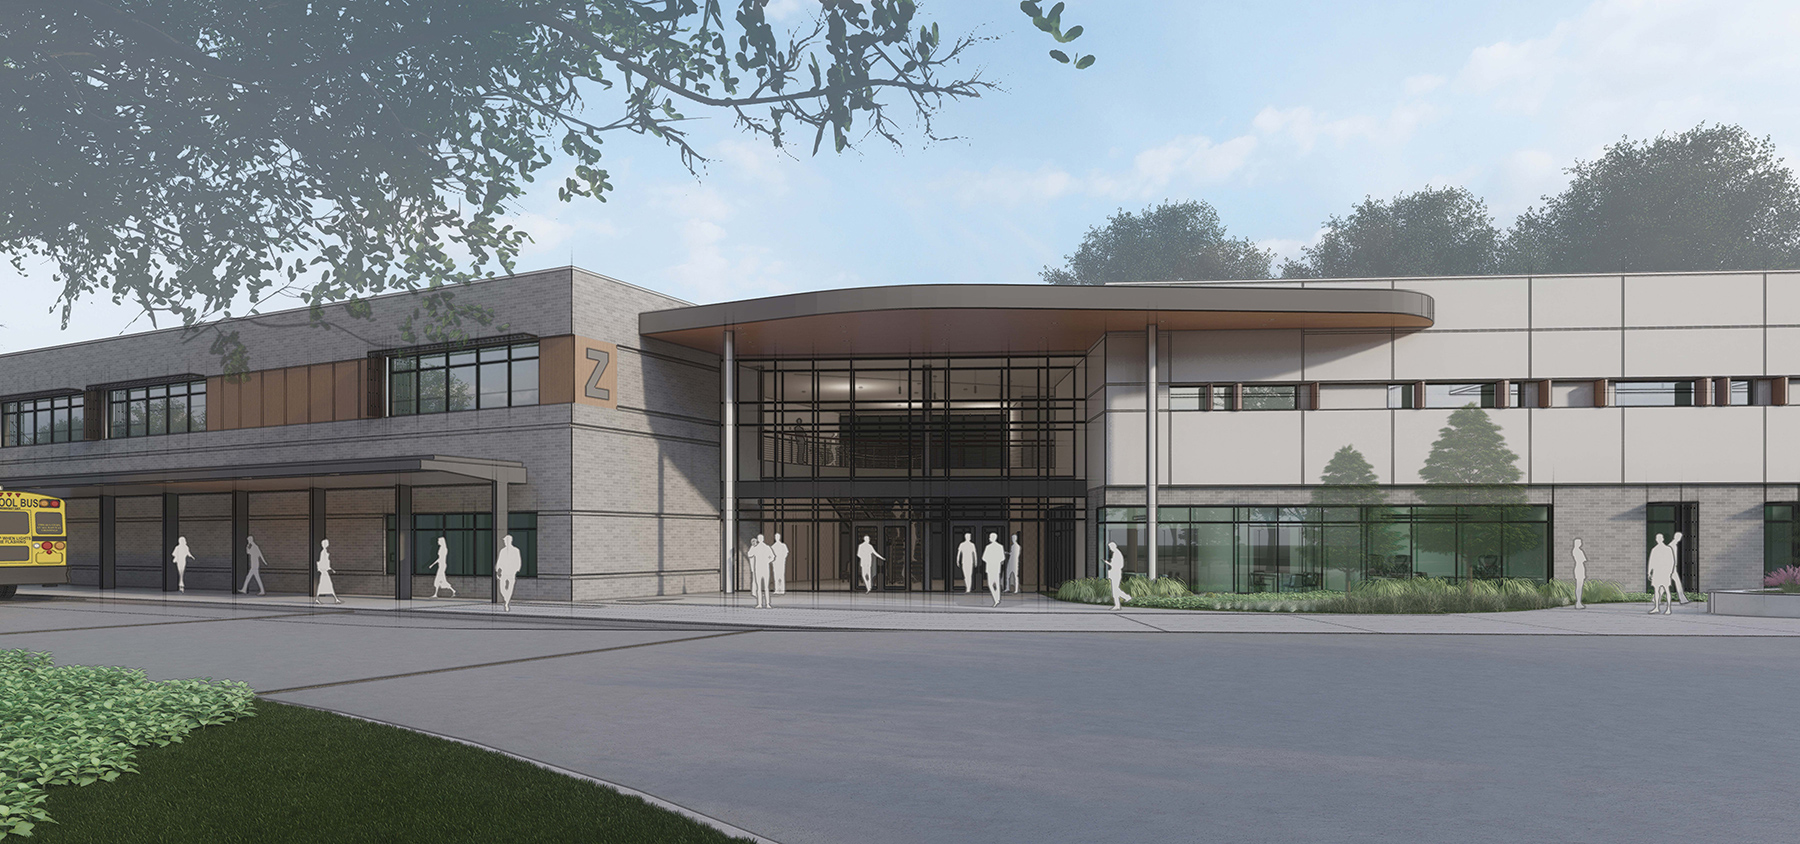 Rendering of two-story higher education building